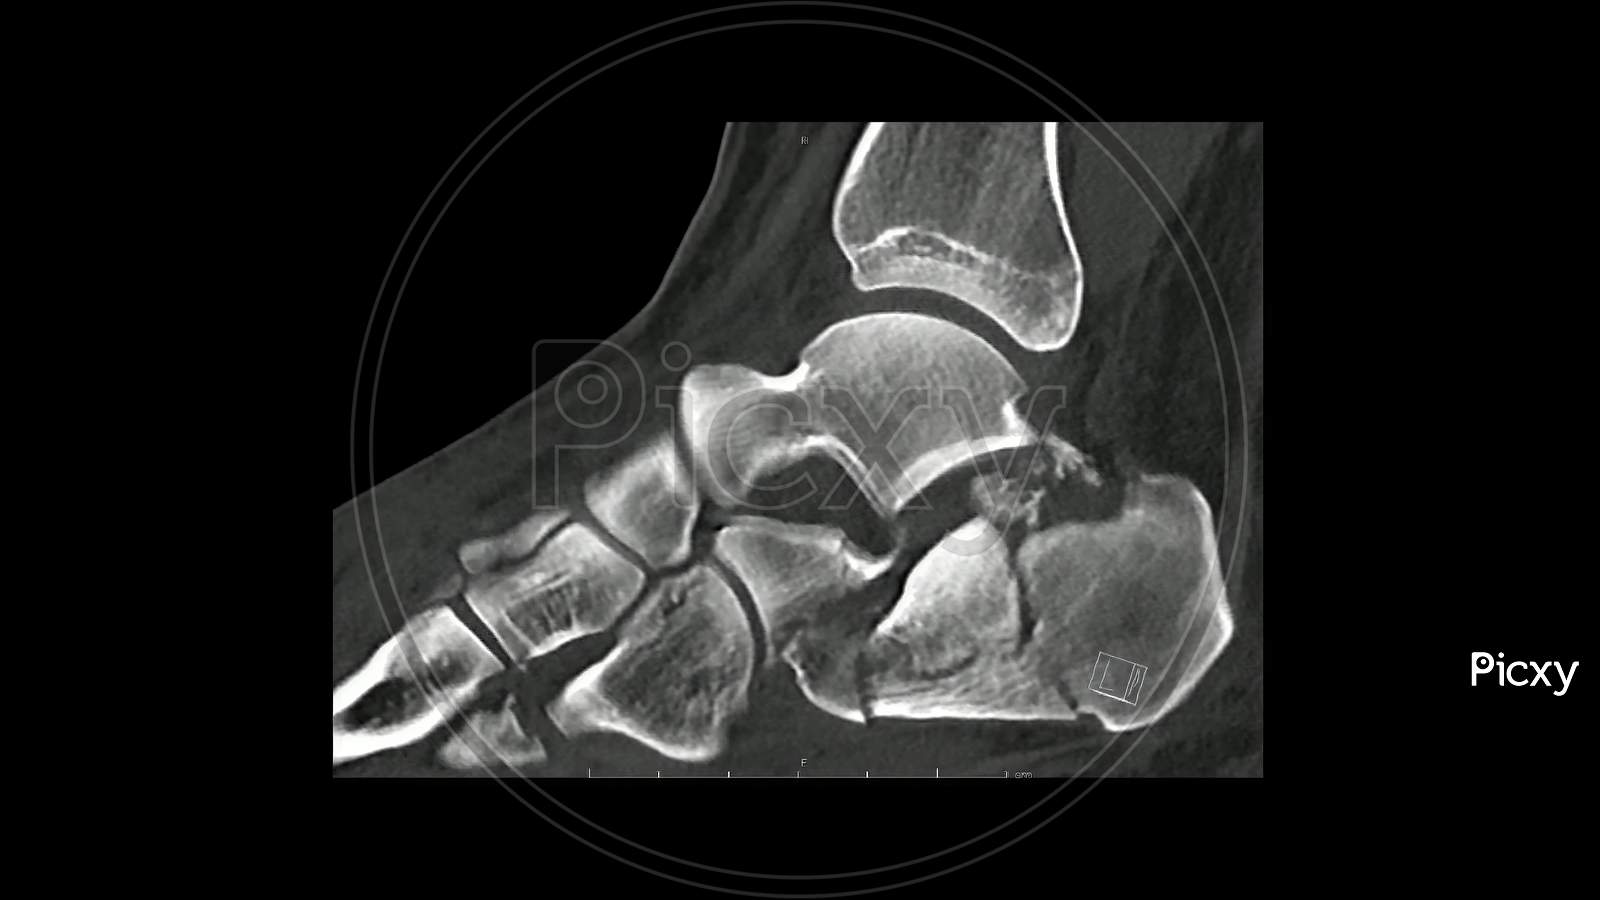 Computed Tomography  of the  foot in sagittal plane showing fracture of  calcaneum/ heel bone